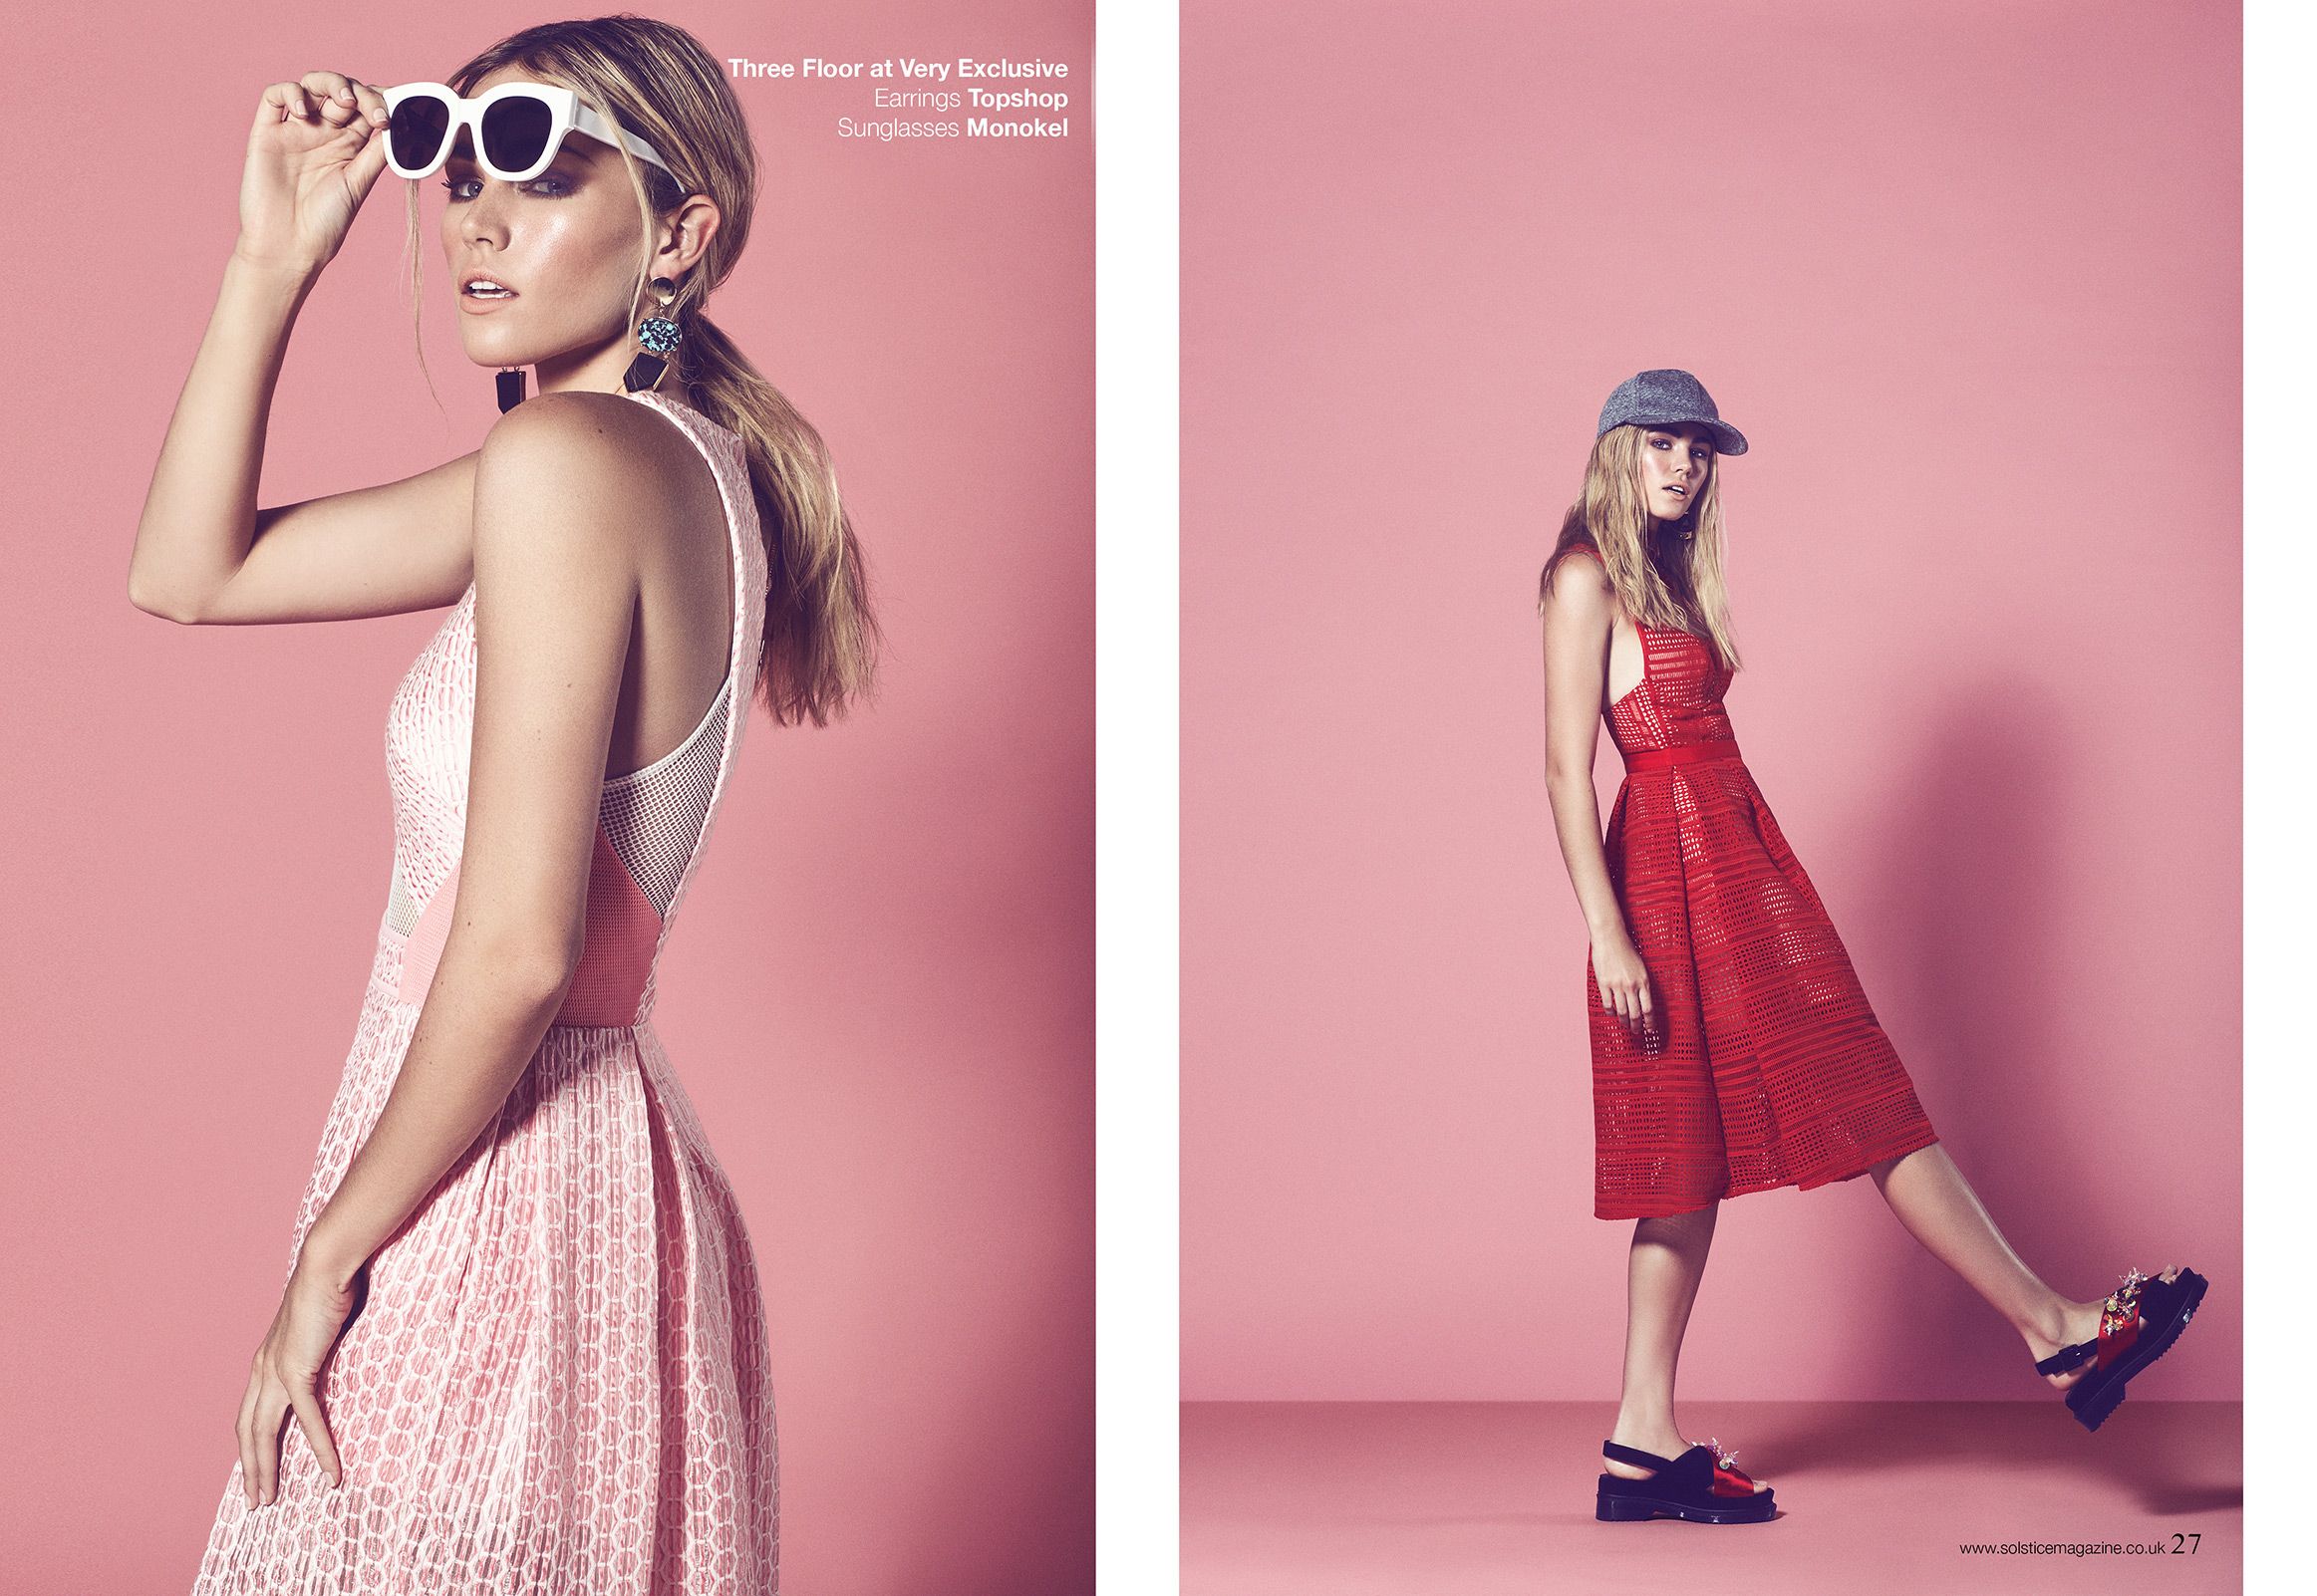 fashion-pink-story-pastels-editorial-pastel-london-photographer-ruth-rose-sophie-young-storm-solstice-magazine-9